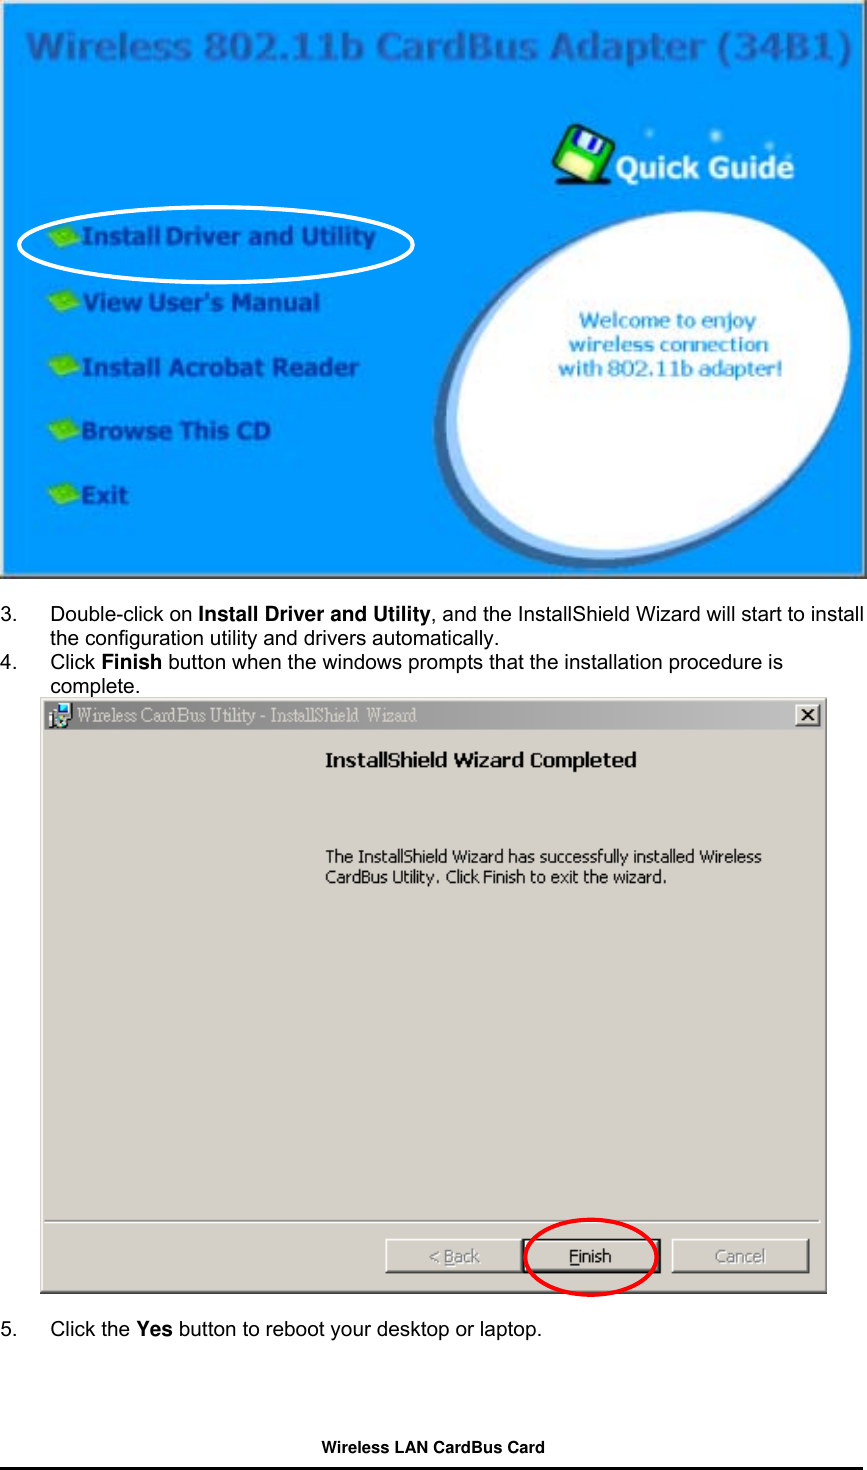   3. Double-click on Install Driver and Utility, and the InstallShield Wizard will start to install the configuration utility and drivers automatically.   4. Click Finish button when the windows prompts that the installation procedure is complete.   5. Click the Yes button to reboot your desktop or laptop.  Wireless LAN CardBus Card 